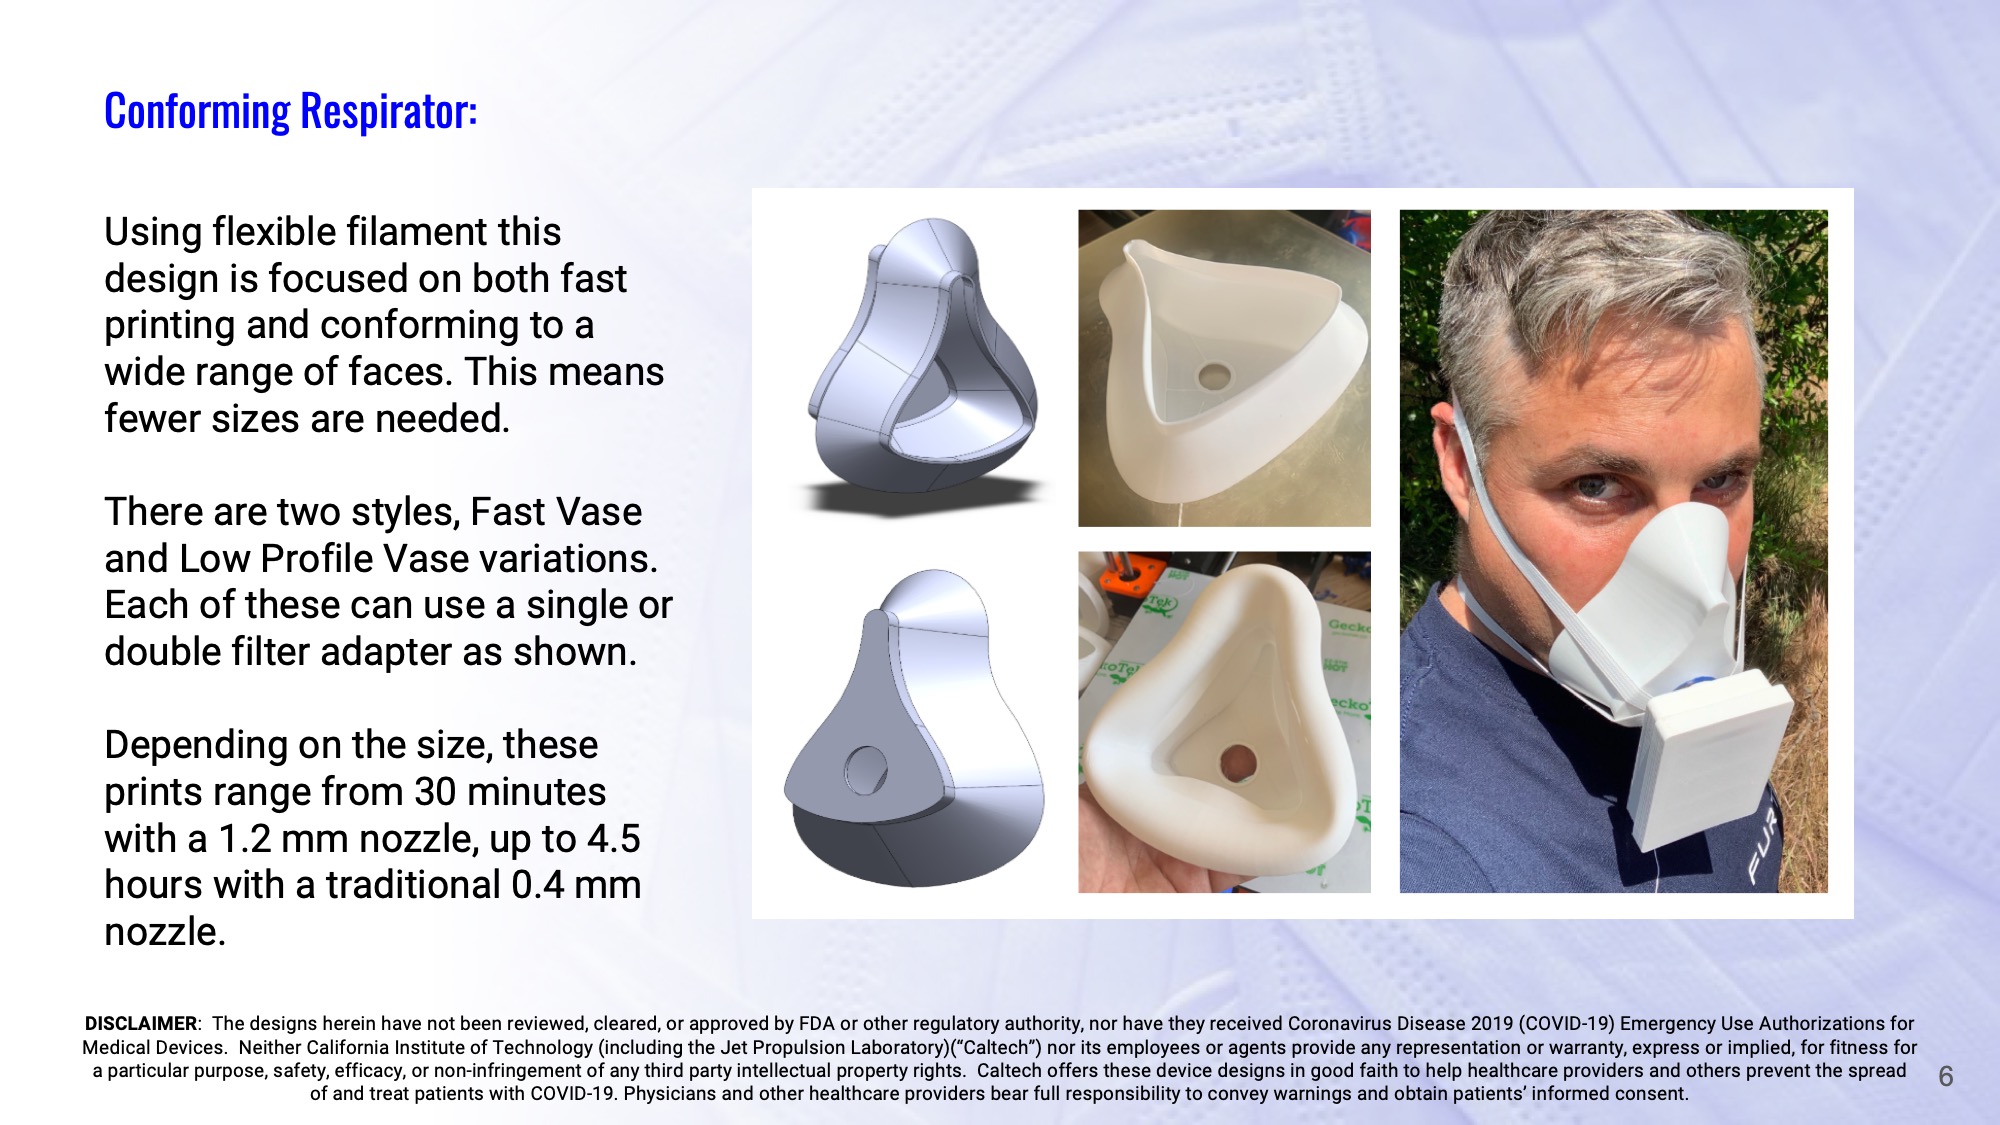 Slide 6: Conforming Respirator: Using flexible filament this design is focused on both fast printing and conforming to a wide range of faces. This means fewer sizes are needed. There are two styles, Fast Vase and Low Profile Vase variations. Each of these can use a single or double filter adapter as shown. Depending on the size, these prints range from 30 minutes with a 1.2 mm nozzle, up to 4.5 hours with a traditional 0.4 mm nozzle.